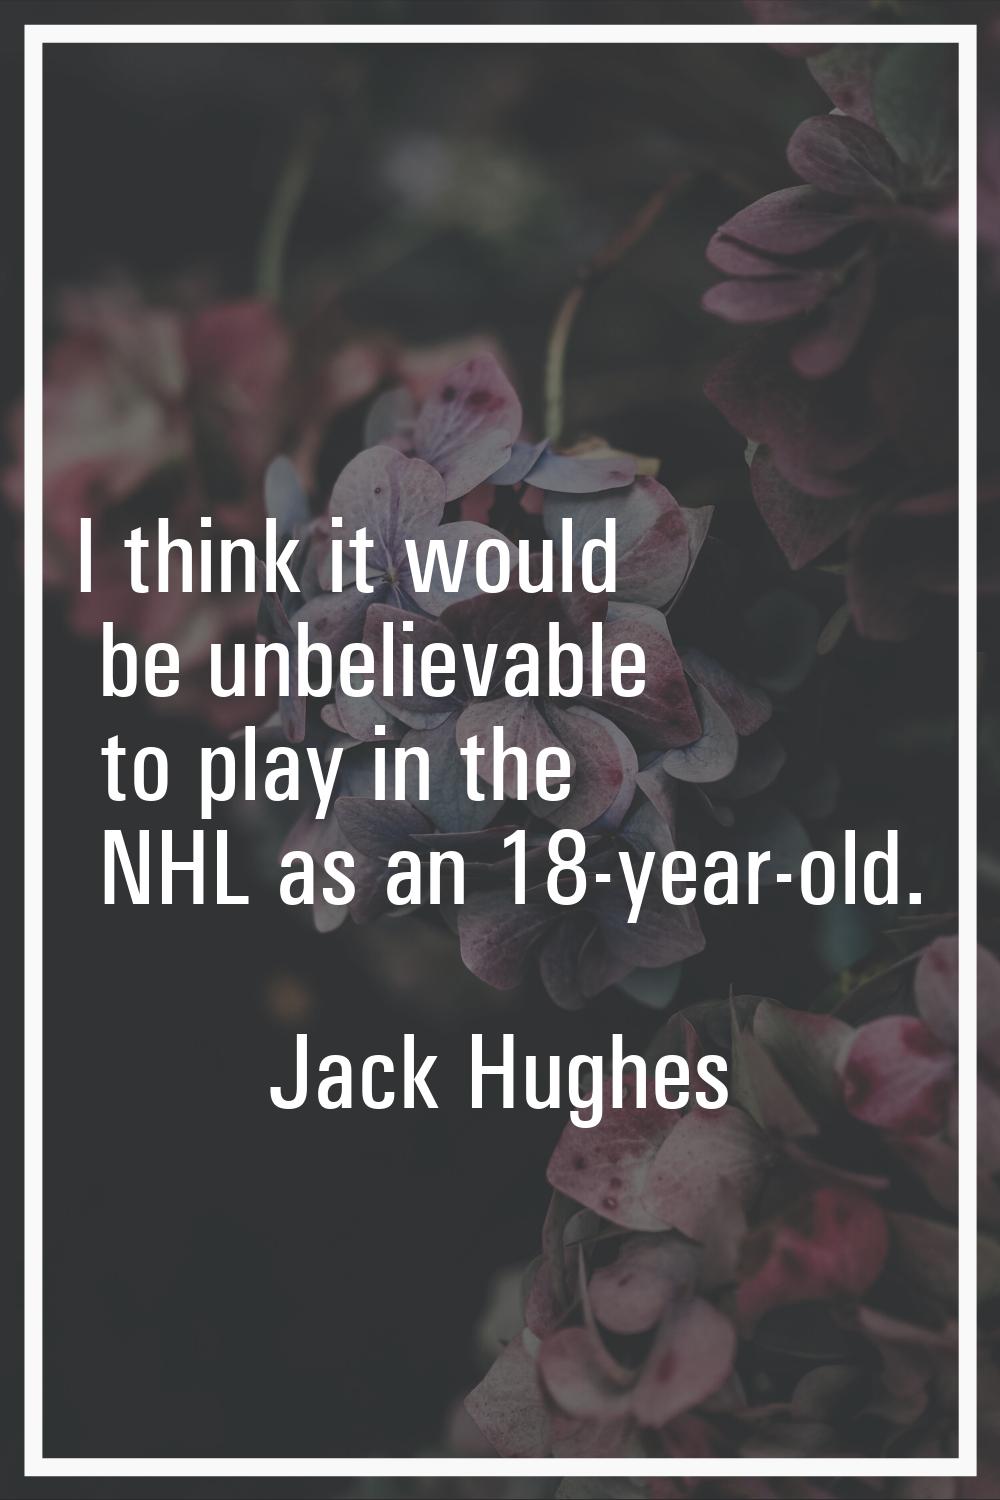 I think it would be unbelievable to play in the NHL as an 18-year-old.